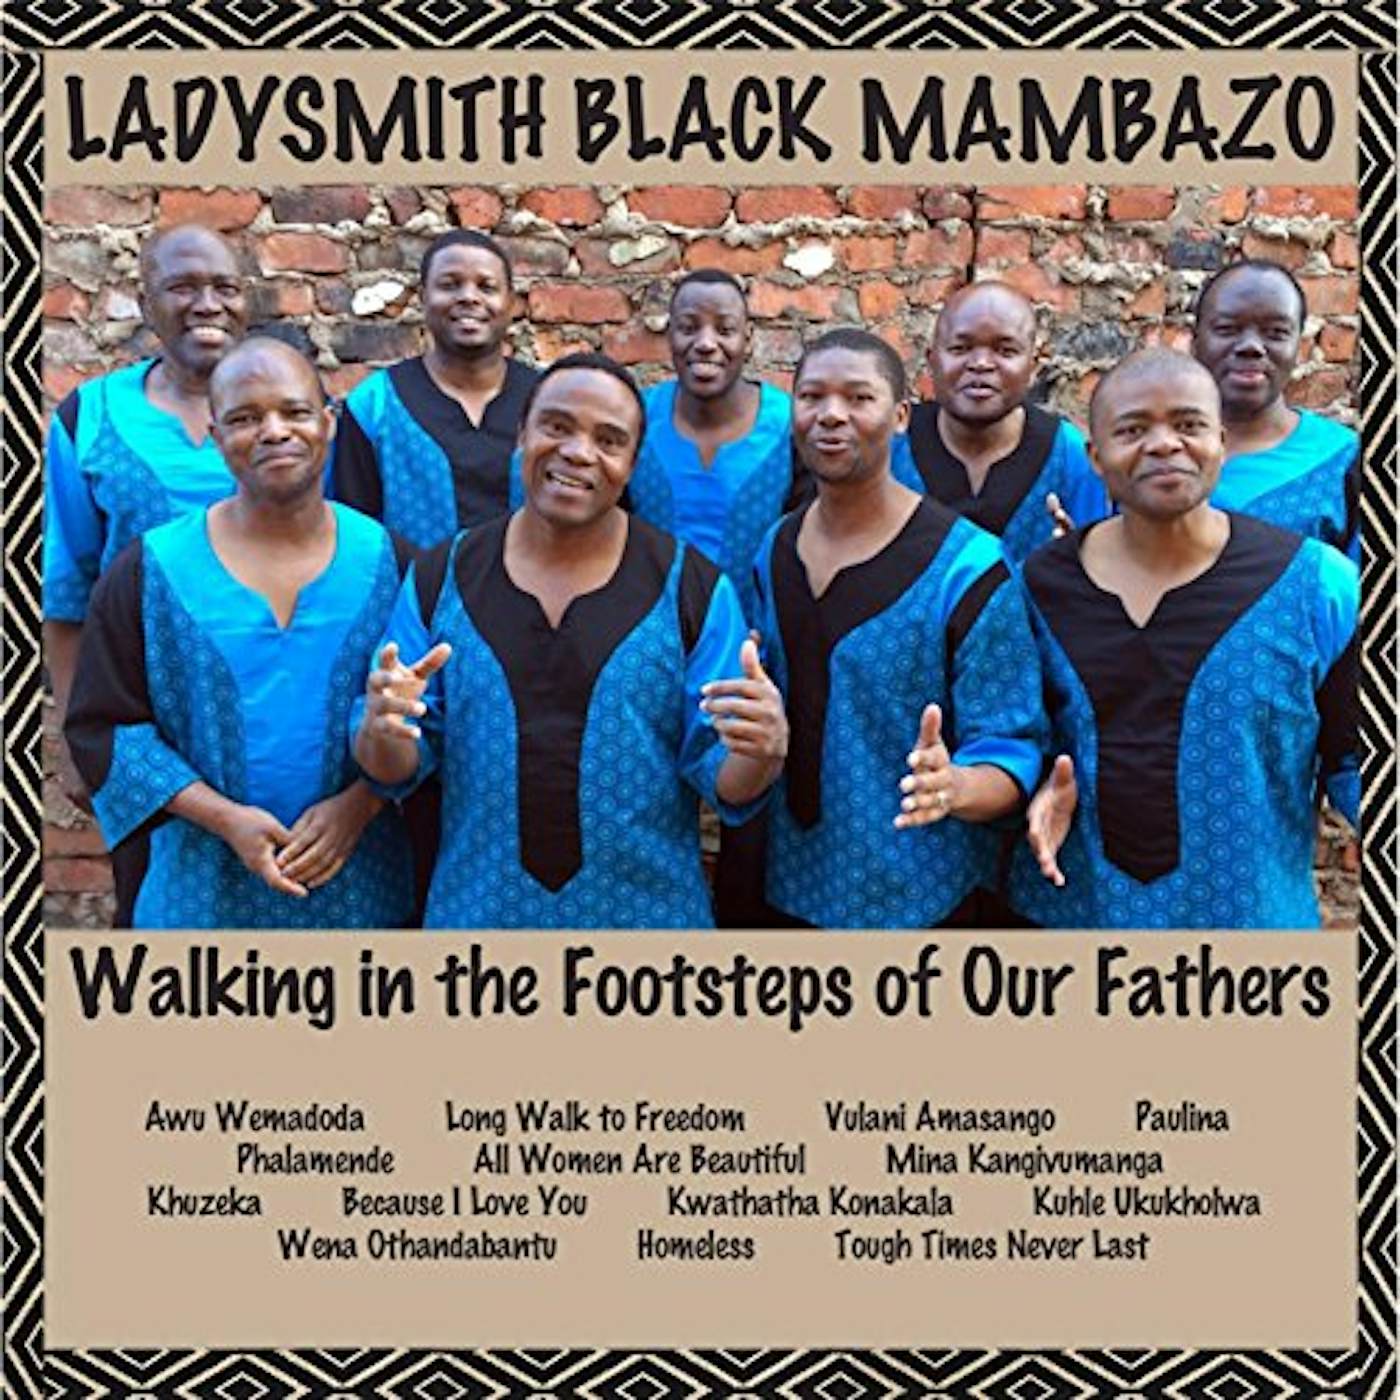 Ladysmith Black Mambazo WALKING IN THE FOOTSTEPS OF OUR FATHERS CD